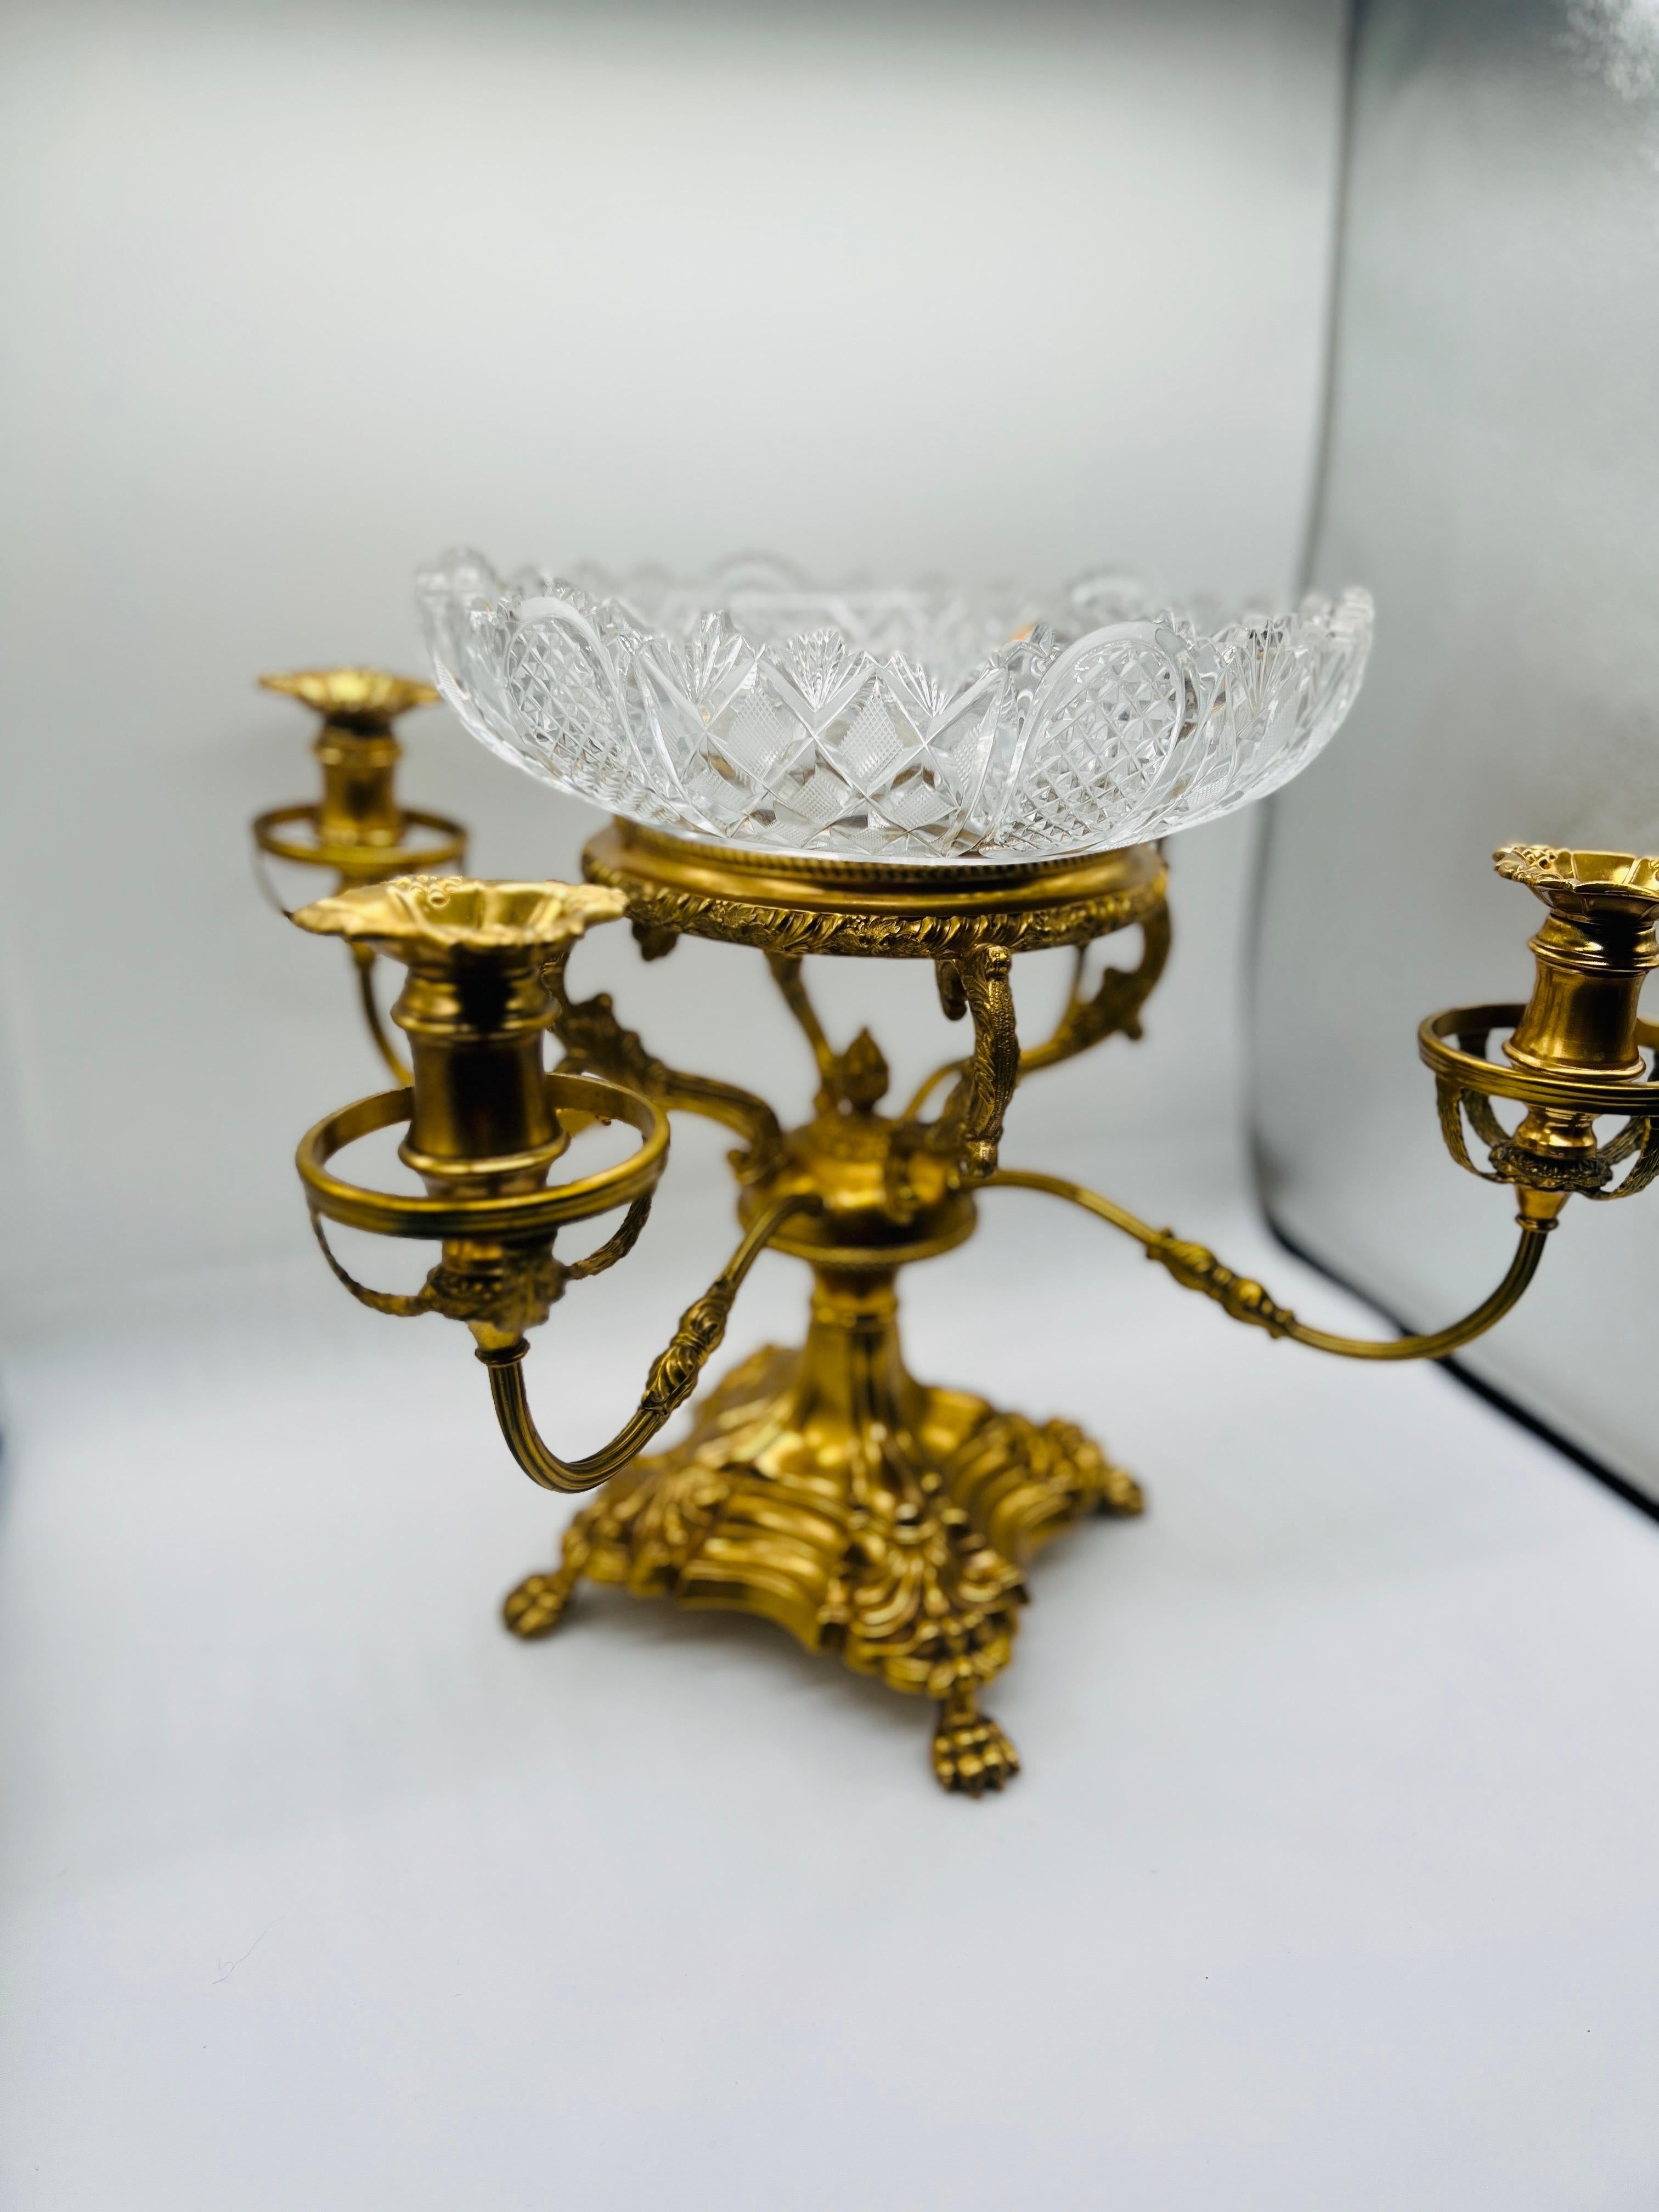 20th Century English Sheffield Gilt Plated William IV Style Cut Glass Epergne or Centerpiece For Sale